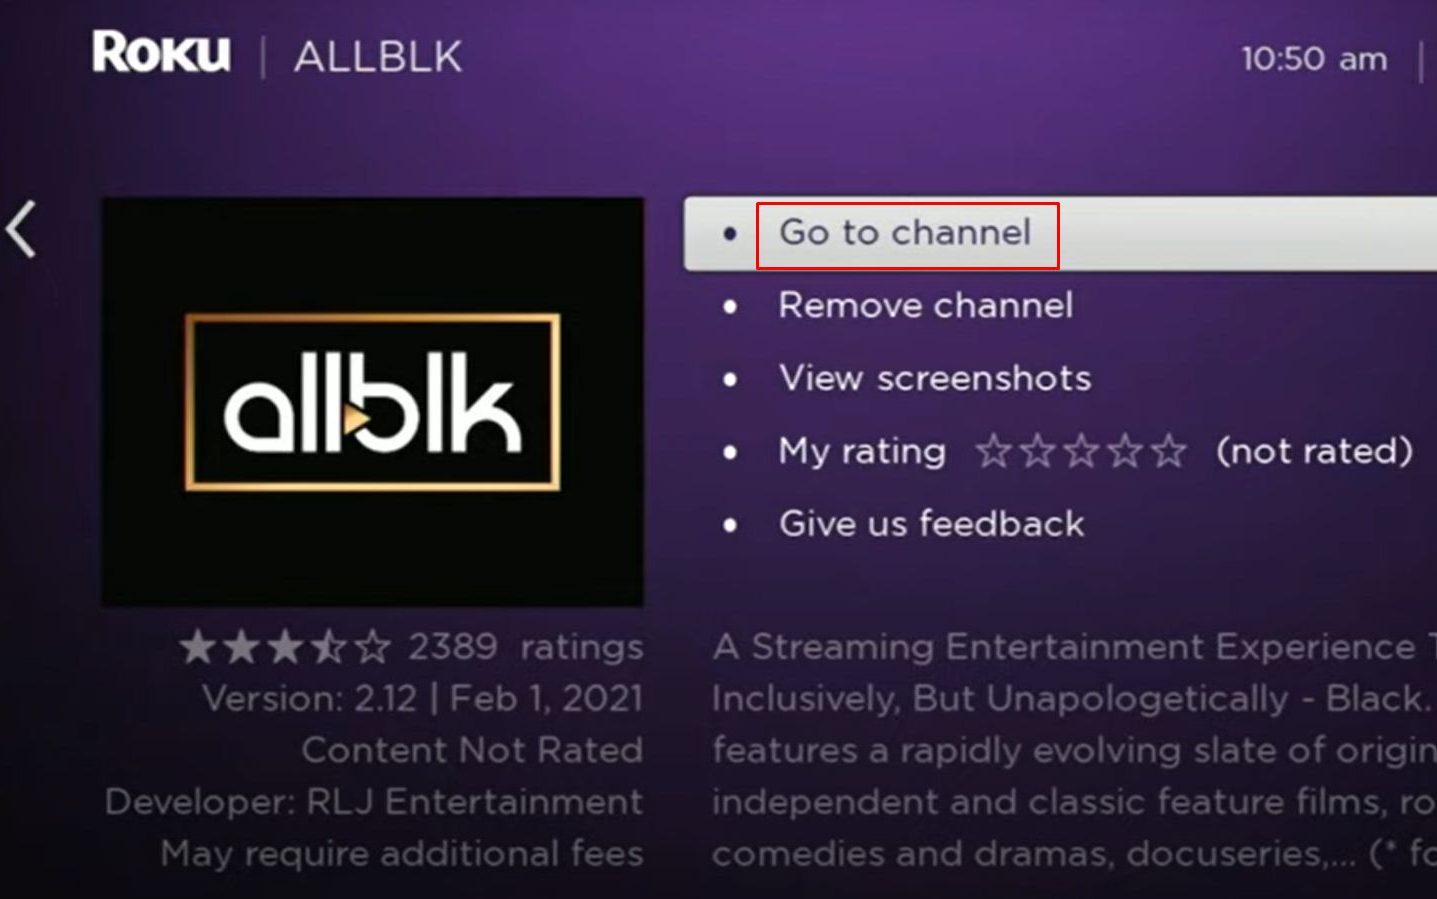 Go to 'Allblk' channel on 'Roku'